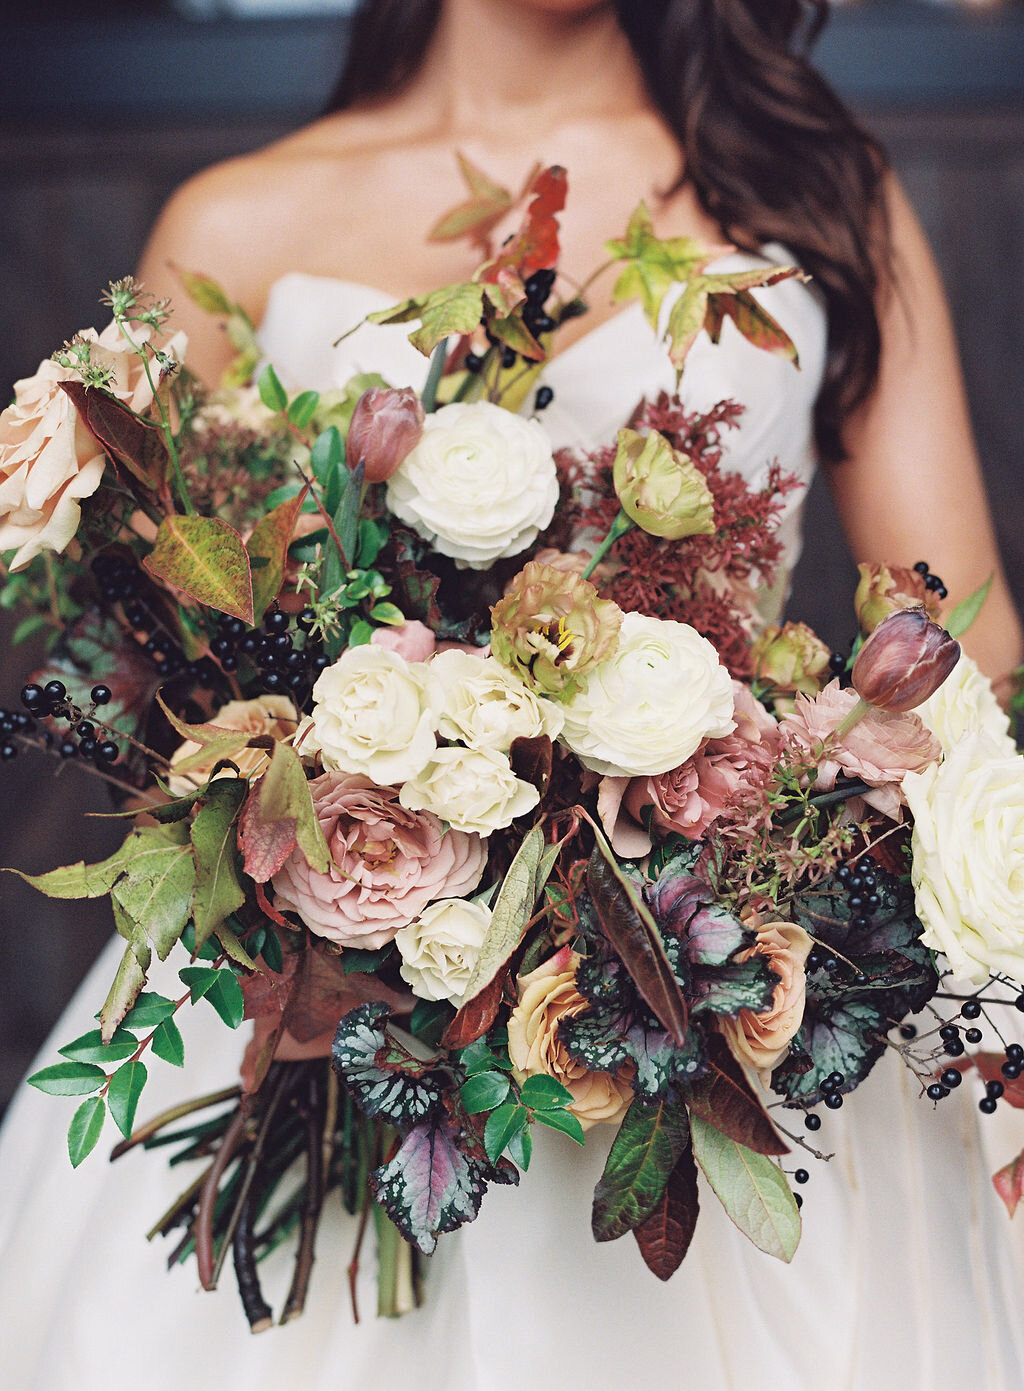 Lush, wild, untamed fall bridal bouquet with a muted autumnal color palette, composed of ligustrum berries, dusty pink ranunculus, tulips, garden roses, fall leaves, begonia leaves, and muted textures. Nashville wedding and corporate event floral de…